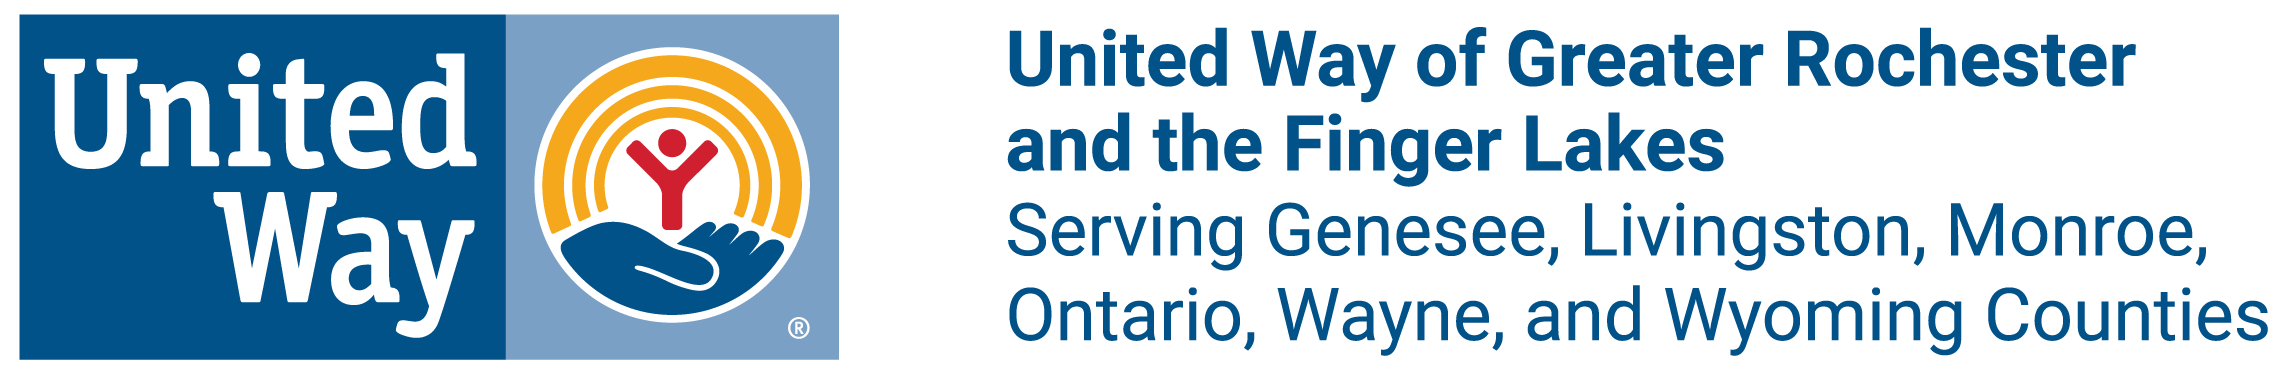 United Way of Greater Rochester and the Finger Lakes Logo